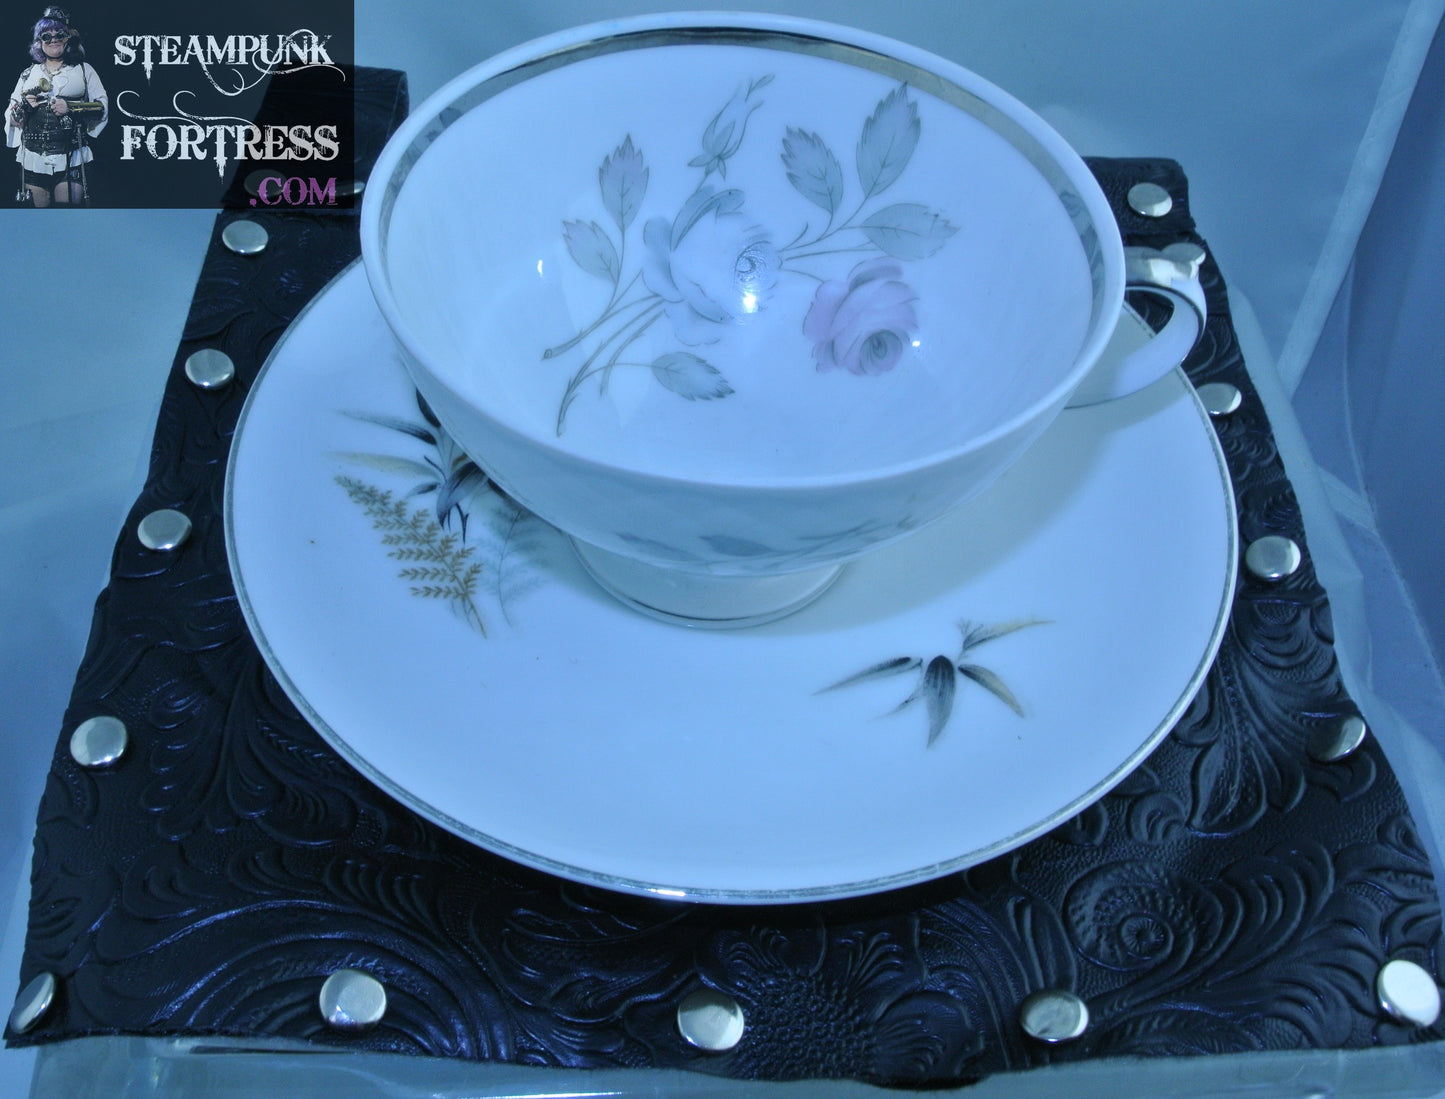 TEA CUP HOLDER BLACK EMBOSSED WHITE FLOWERS SET DUELING DUELLING SAUCER FLORAL FAUX LEATHER VEGAN STARR WILDE STEAMPUNK FORTRESS